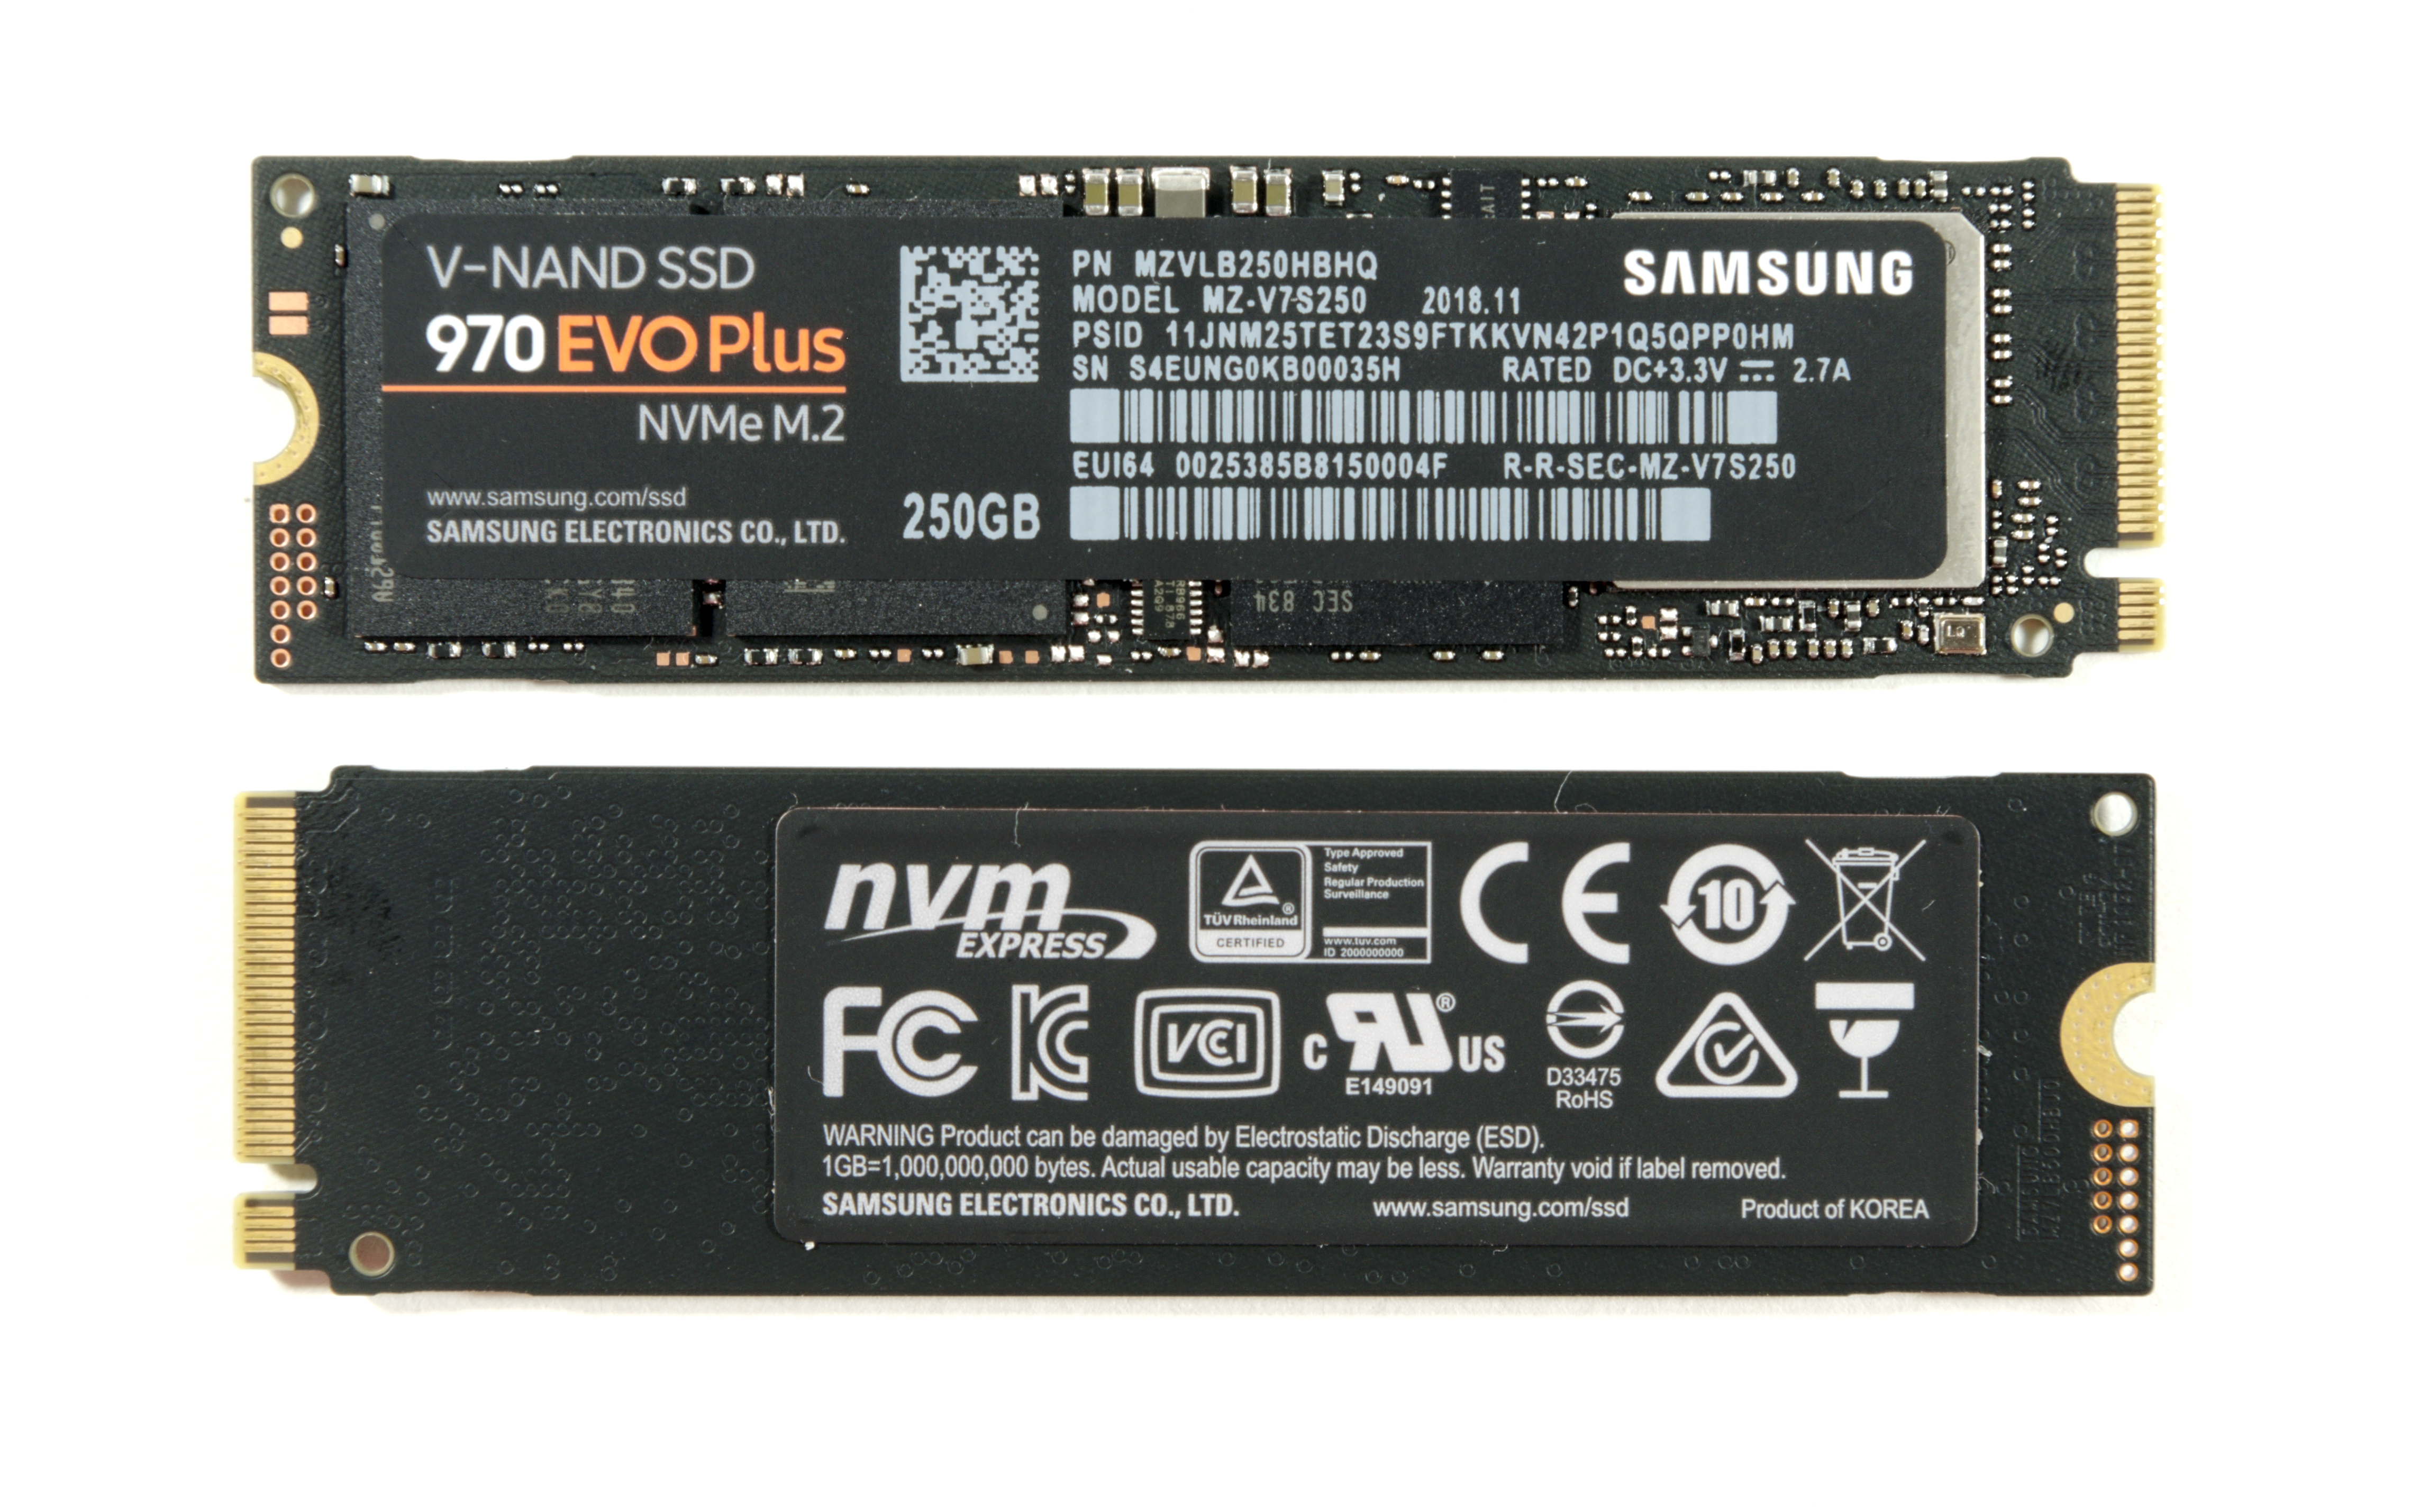 Brewery Motivate noise The Samsung 970 EVO Plus (250GB, 1TB) NVMe SSD Review: 92-Layer 3D NAND